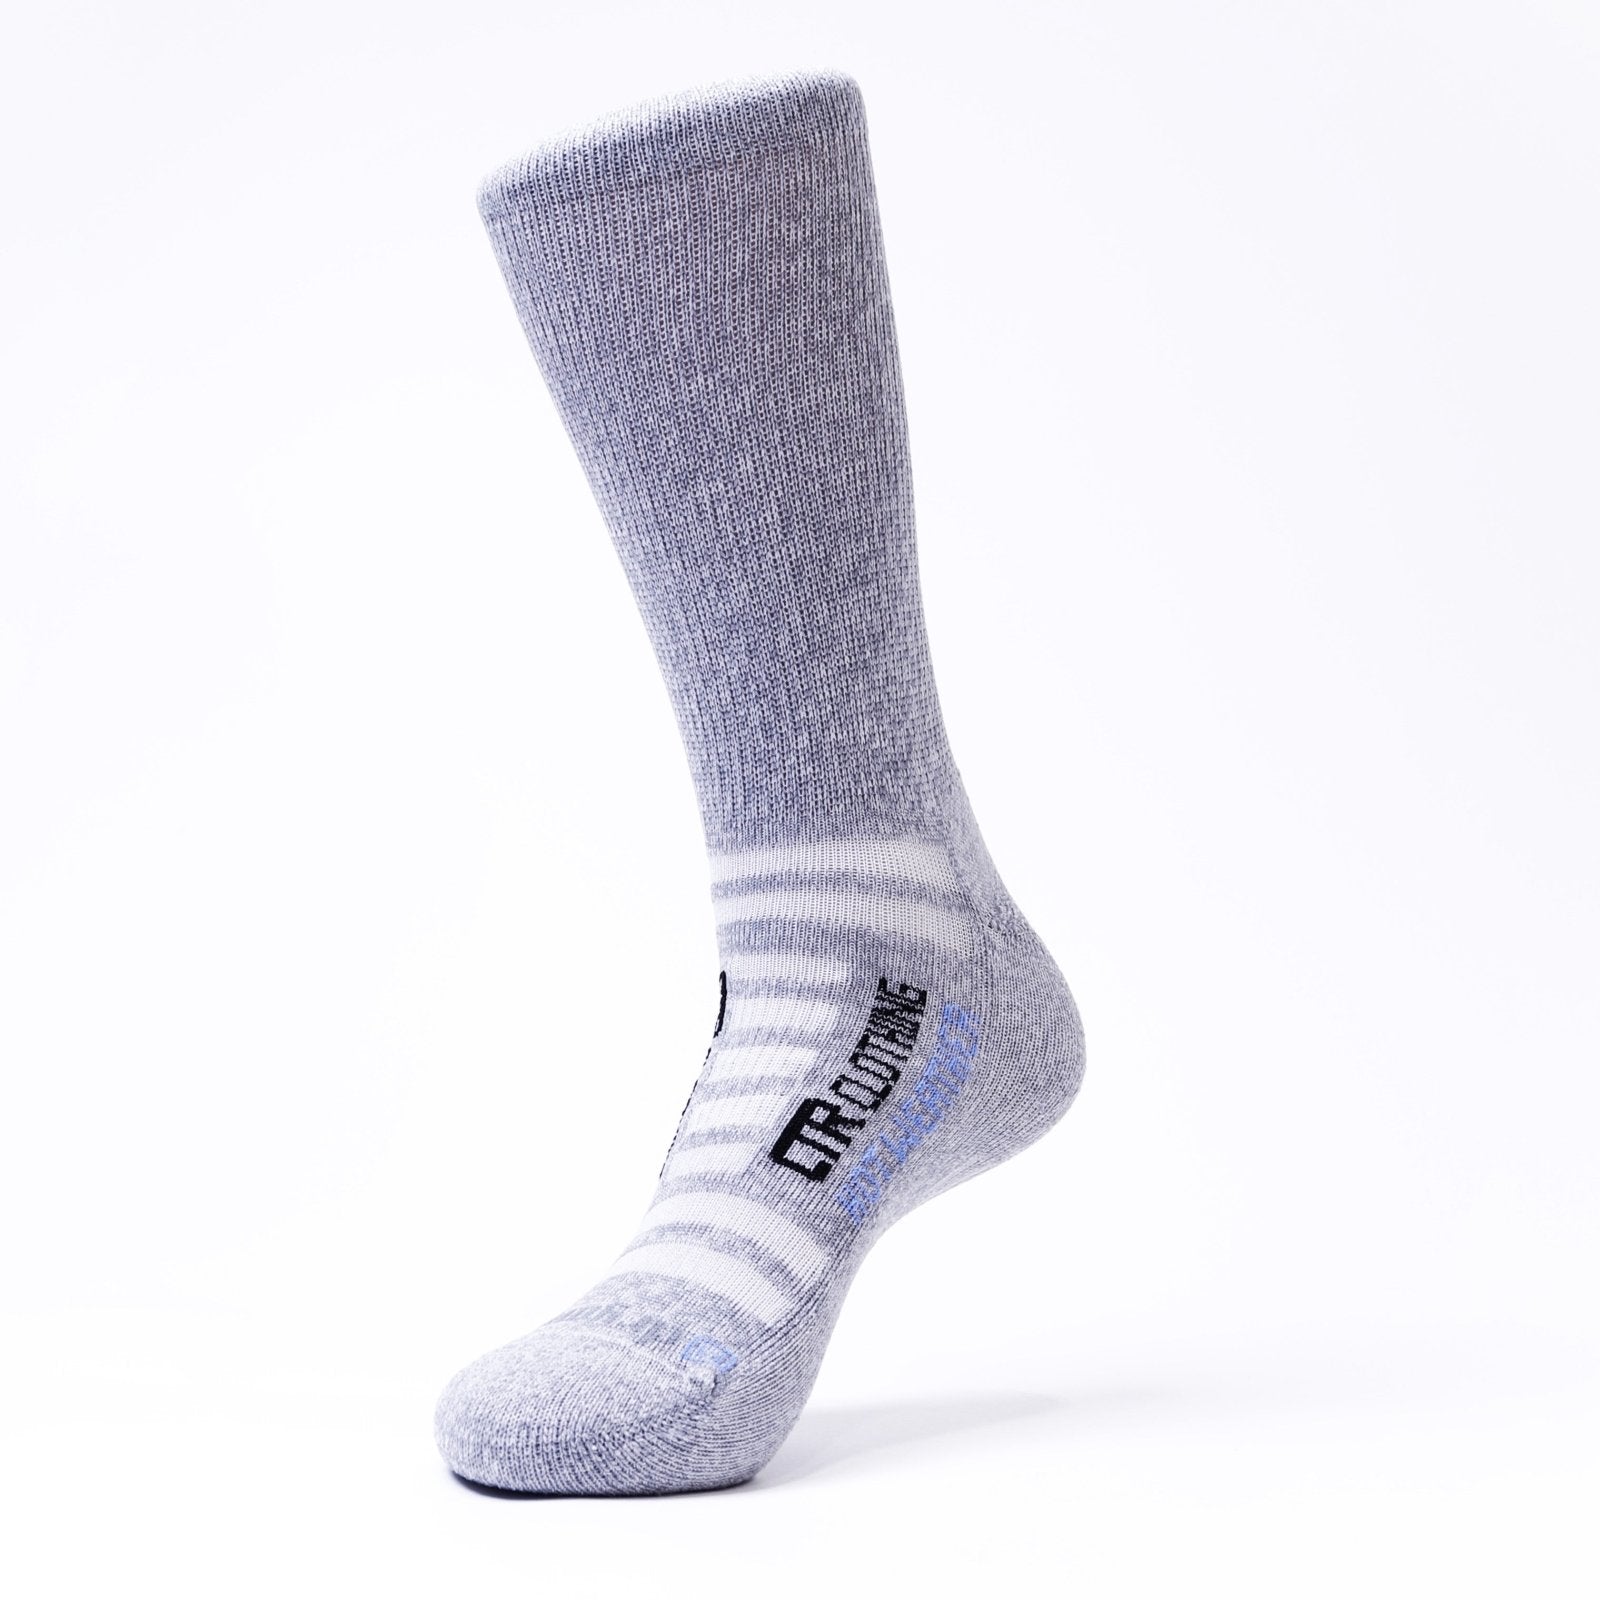 Drymax Hot Weather "CTR Sock" Lite-Mesh - ODIONCTR-DRS-51137-P